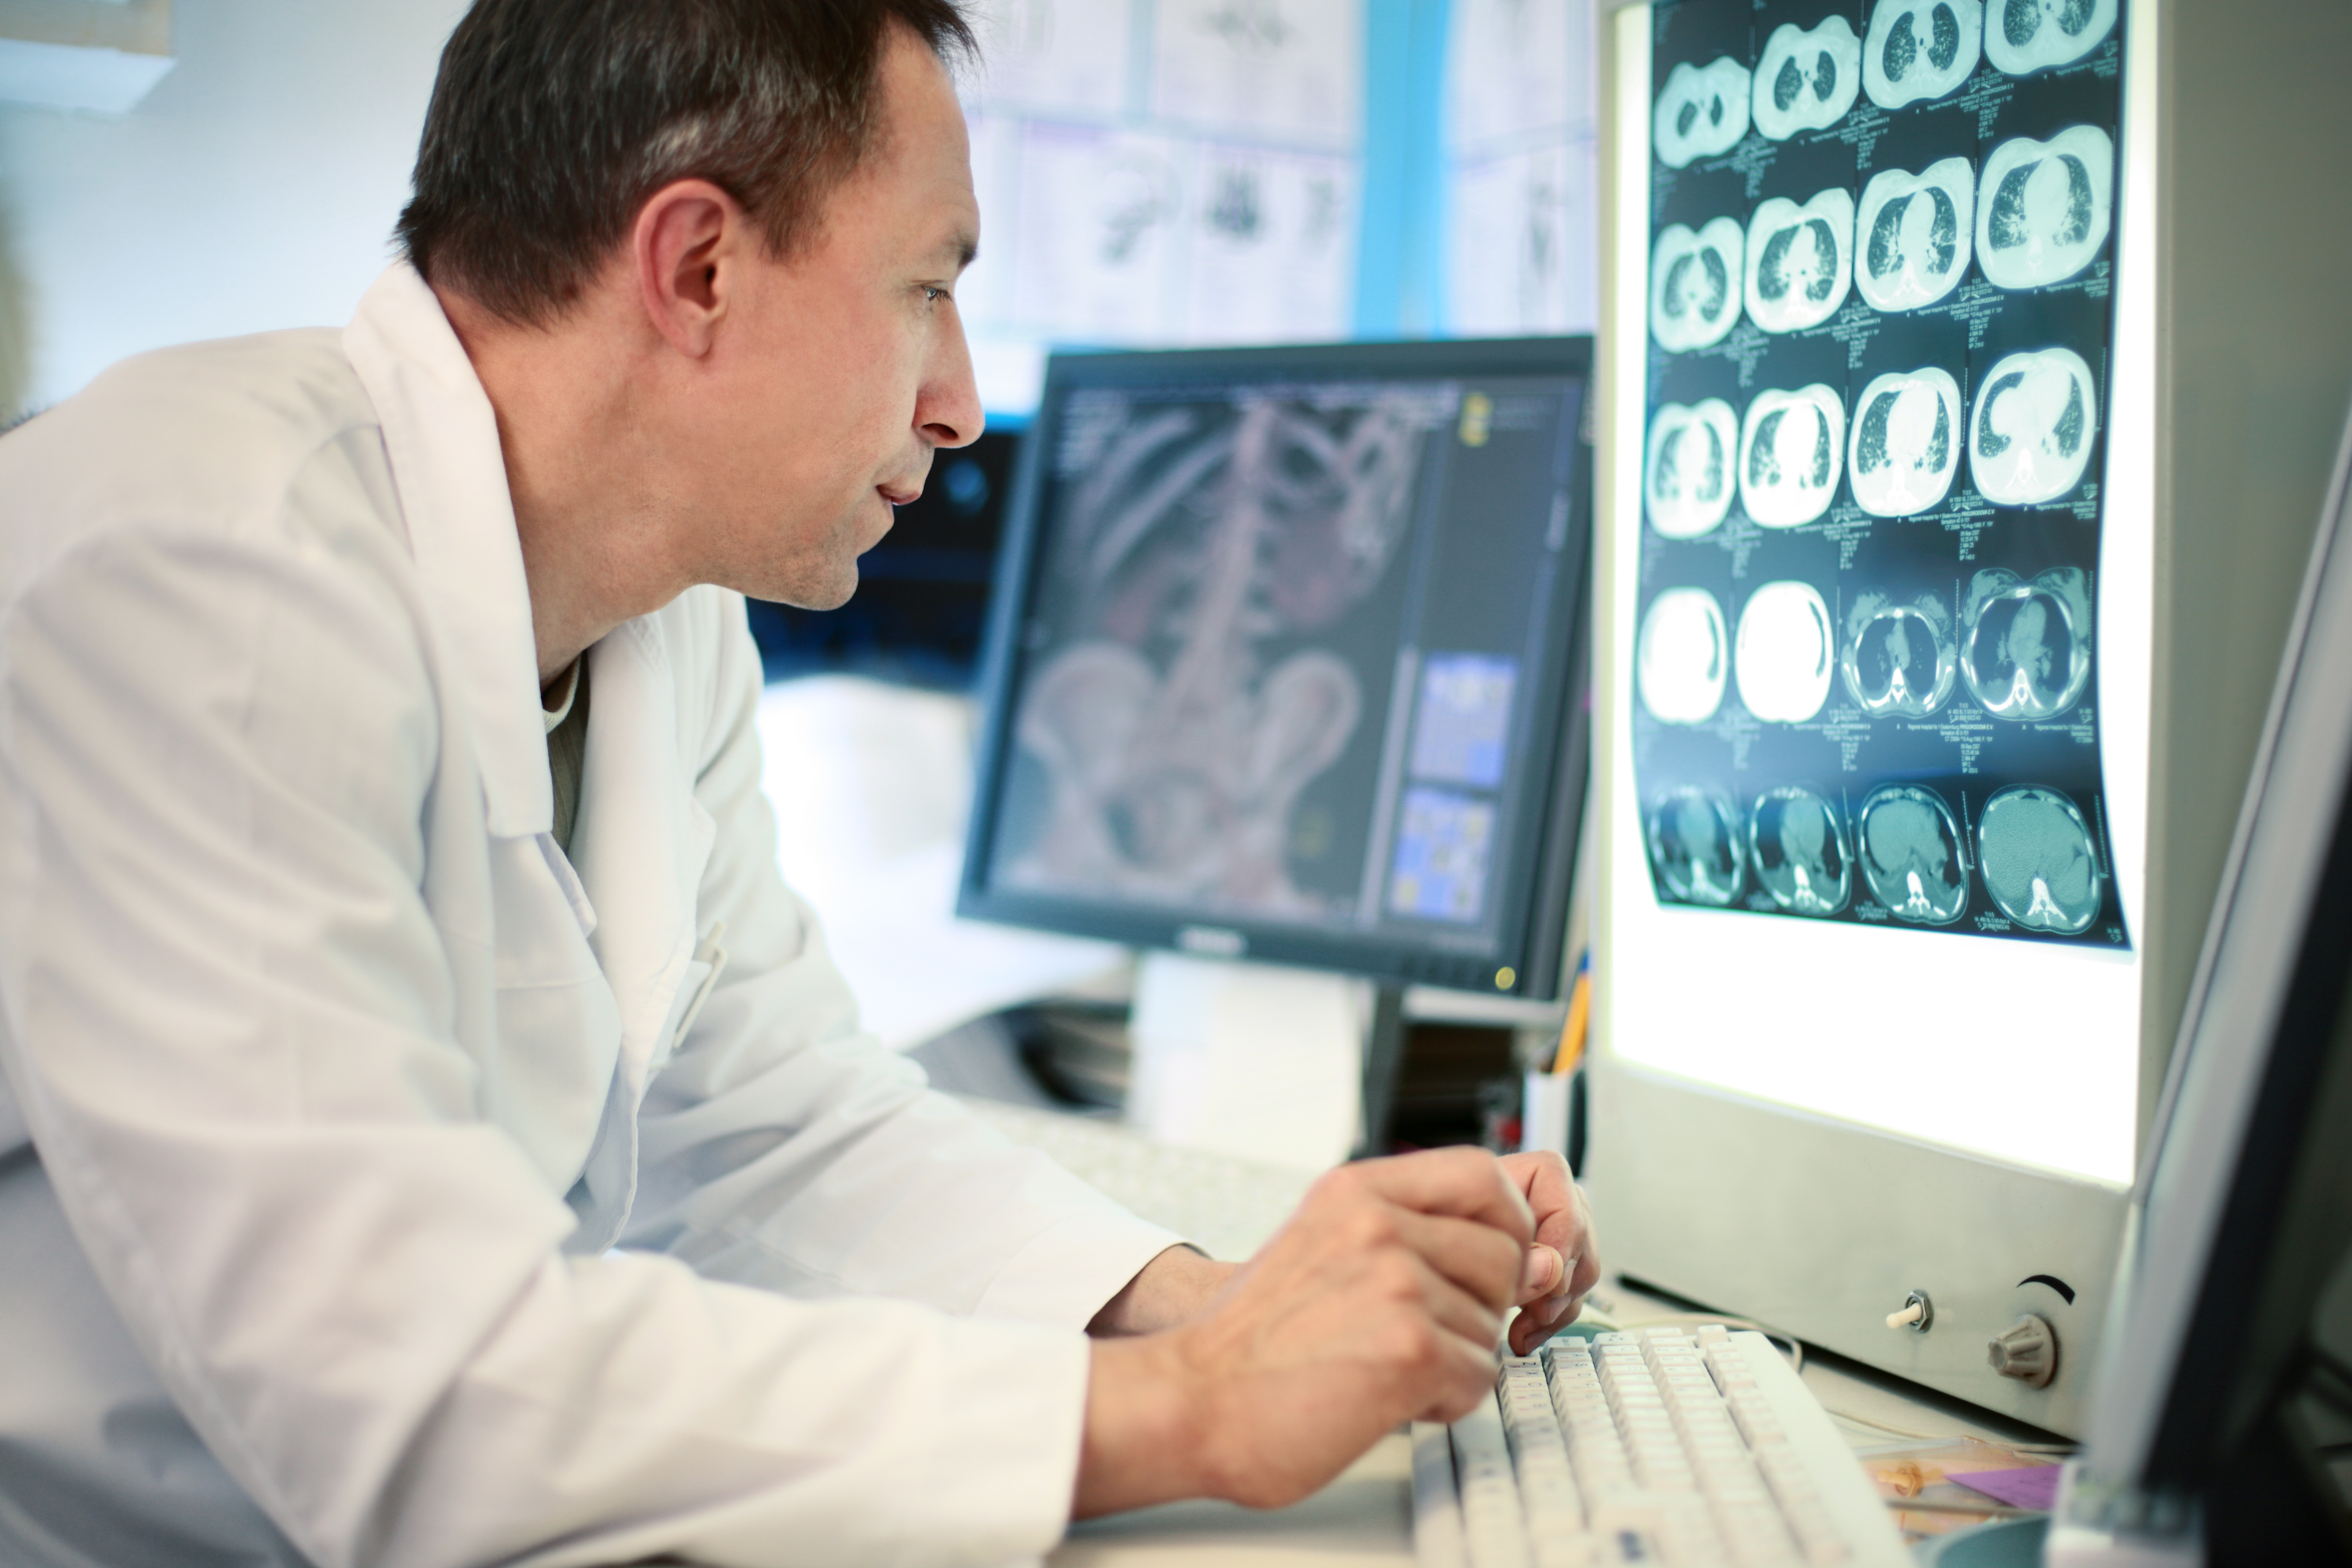 Could Radiology Supplements be the Next Revenue Stream Opportunity?